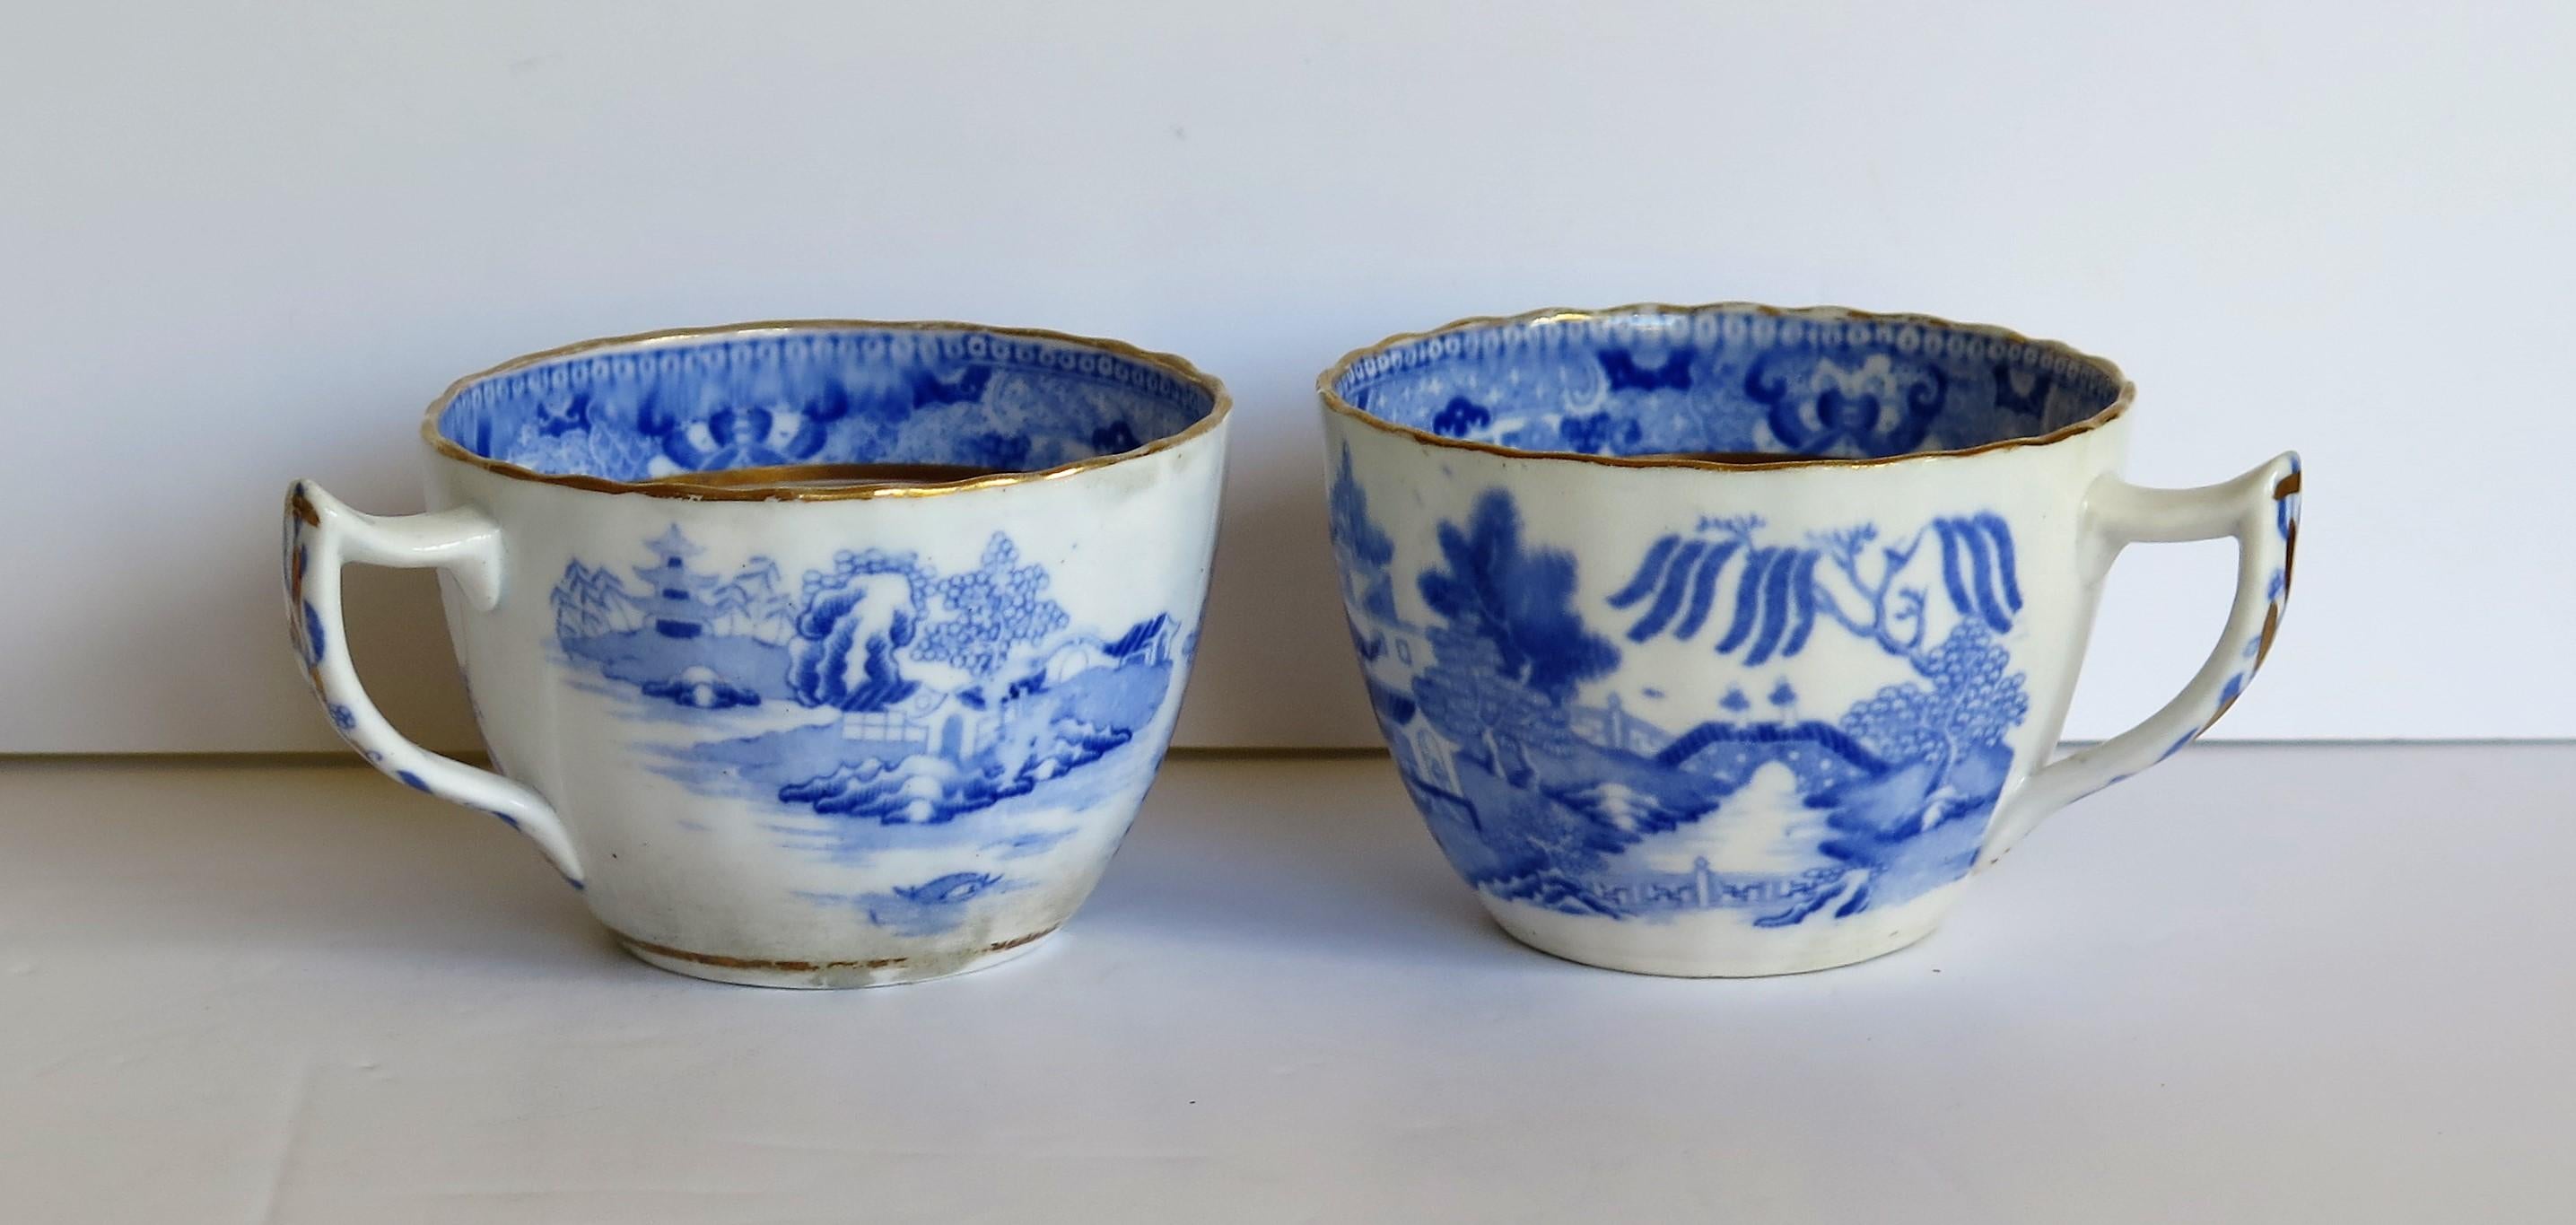 English Miles Mason Porcelain Pair of Tea Cups Broseley Blue and White Pattern, Ca. 1805 For Sale